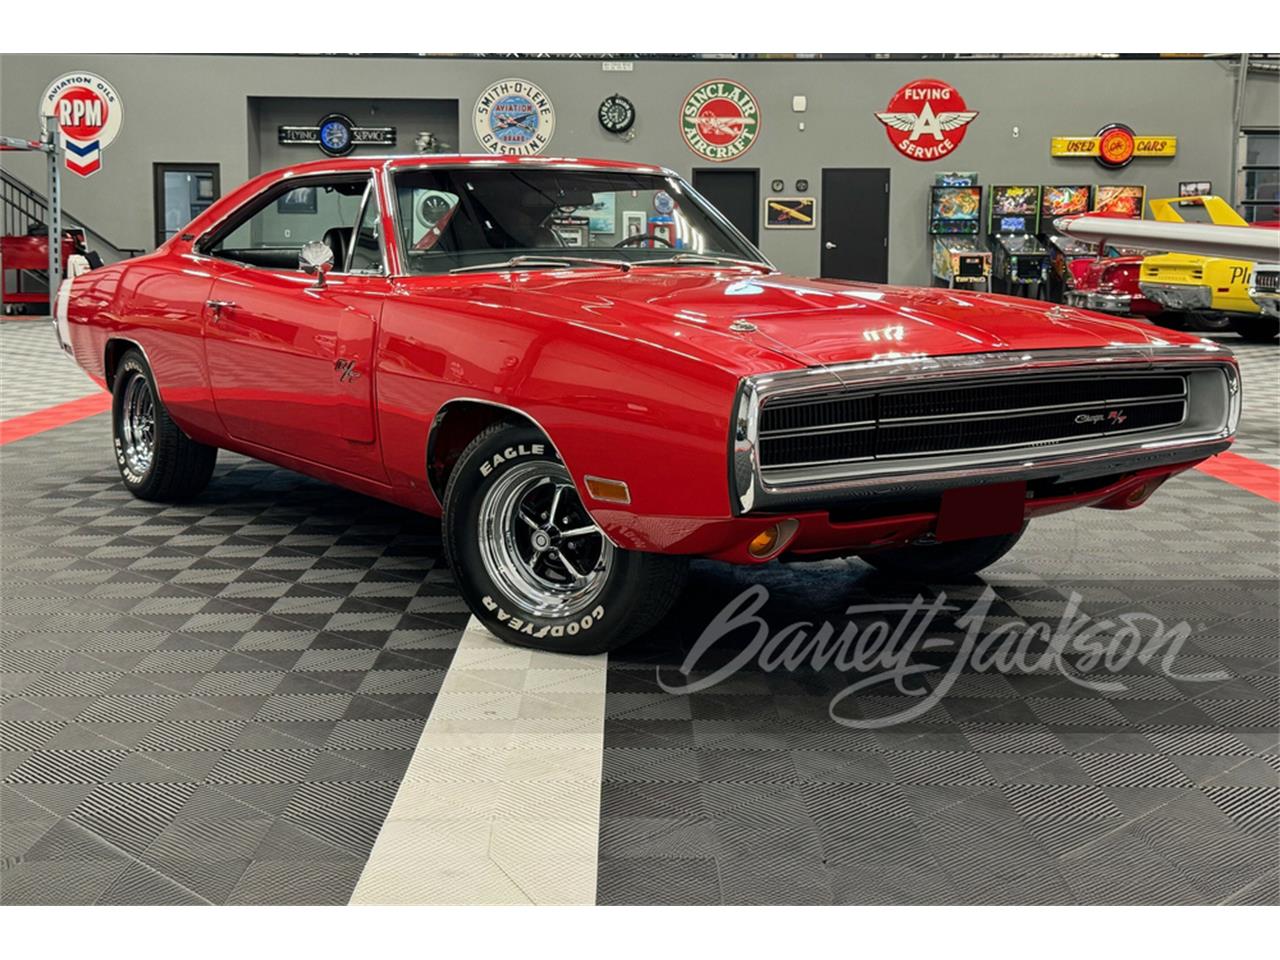 For Sale at Auction: 1970 Dodge Charger R/T in Scottsdale, Arizona for sale in Scottsdale, AZ